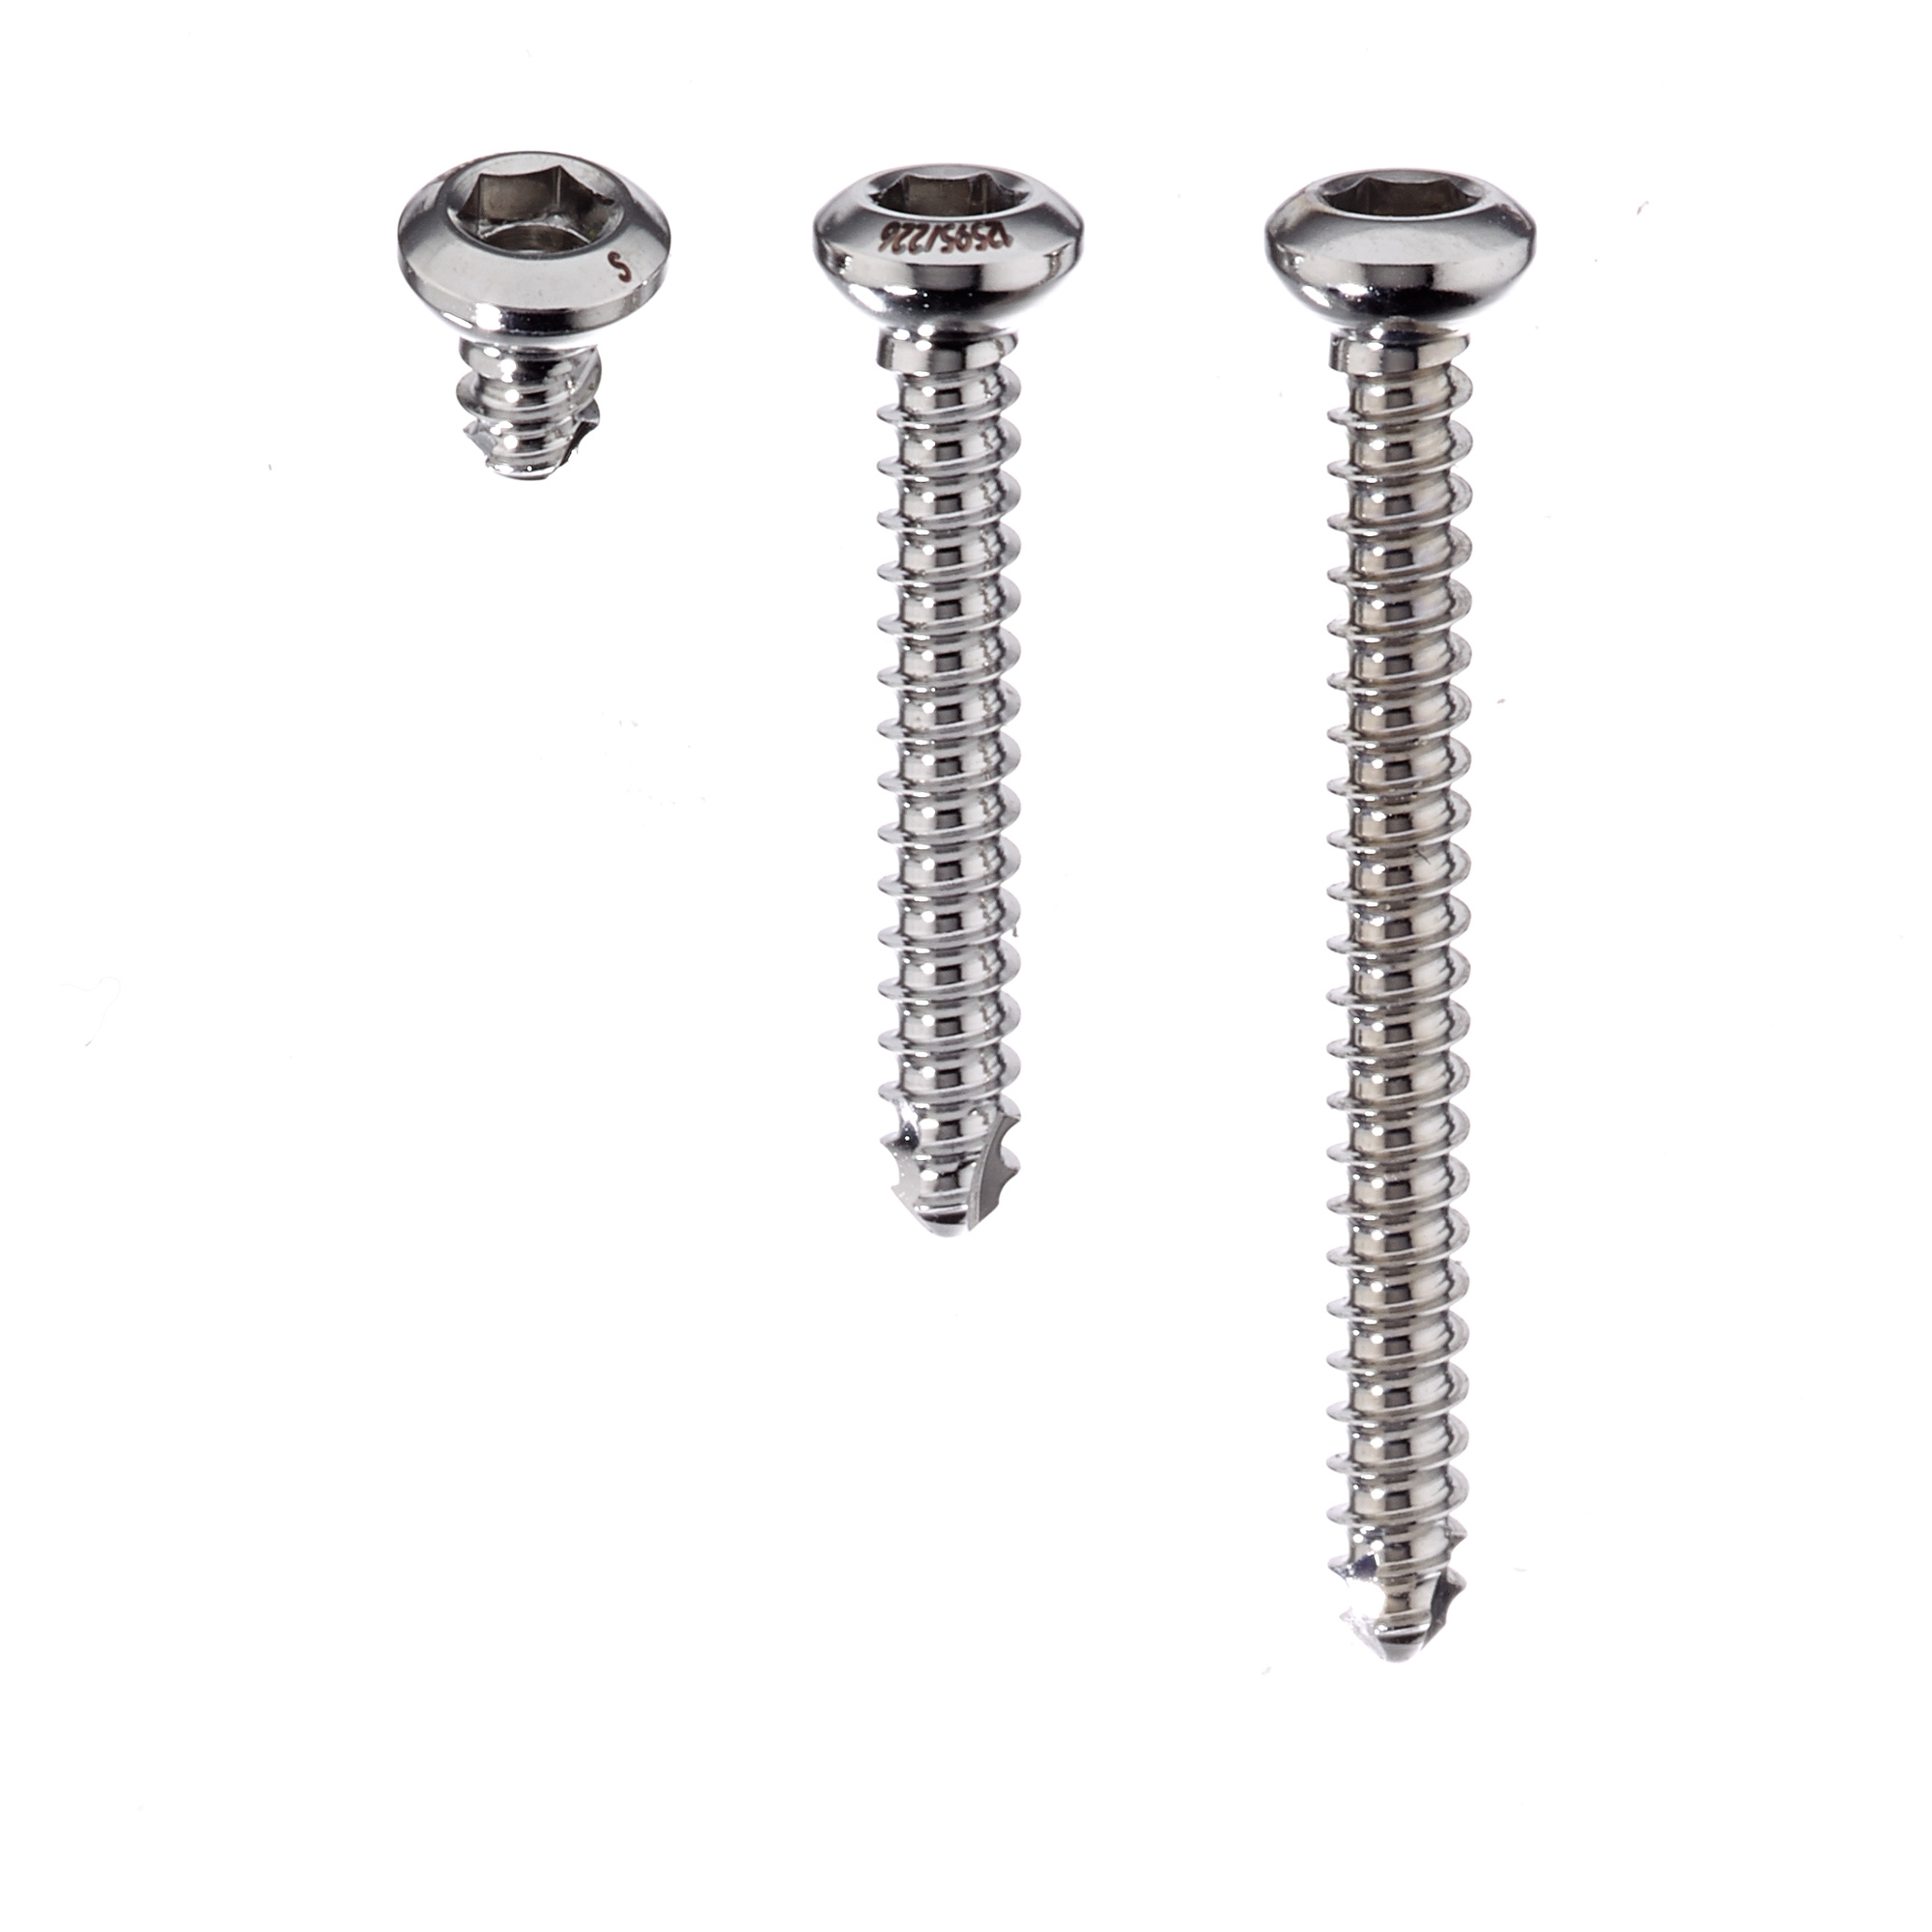 Stainless Steel Self Tapping Screws